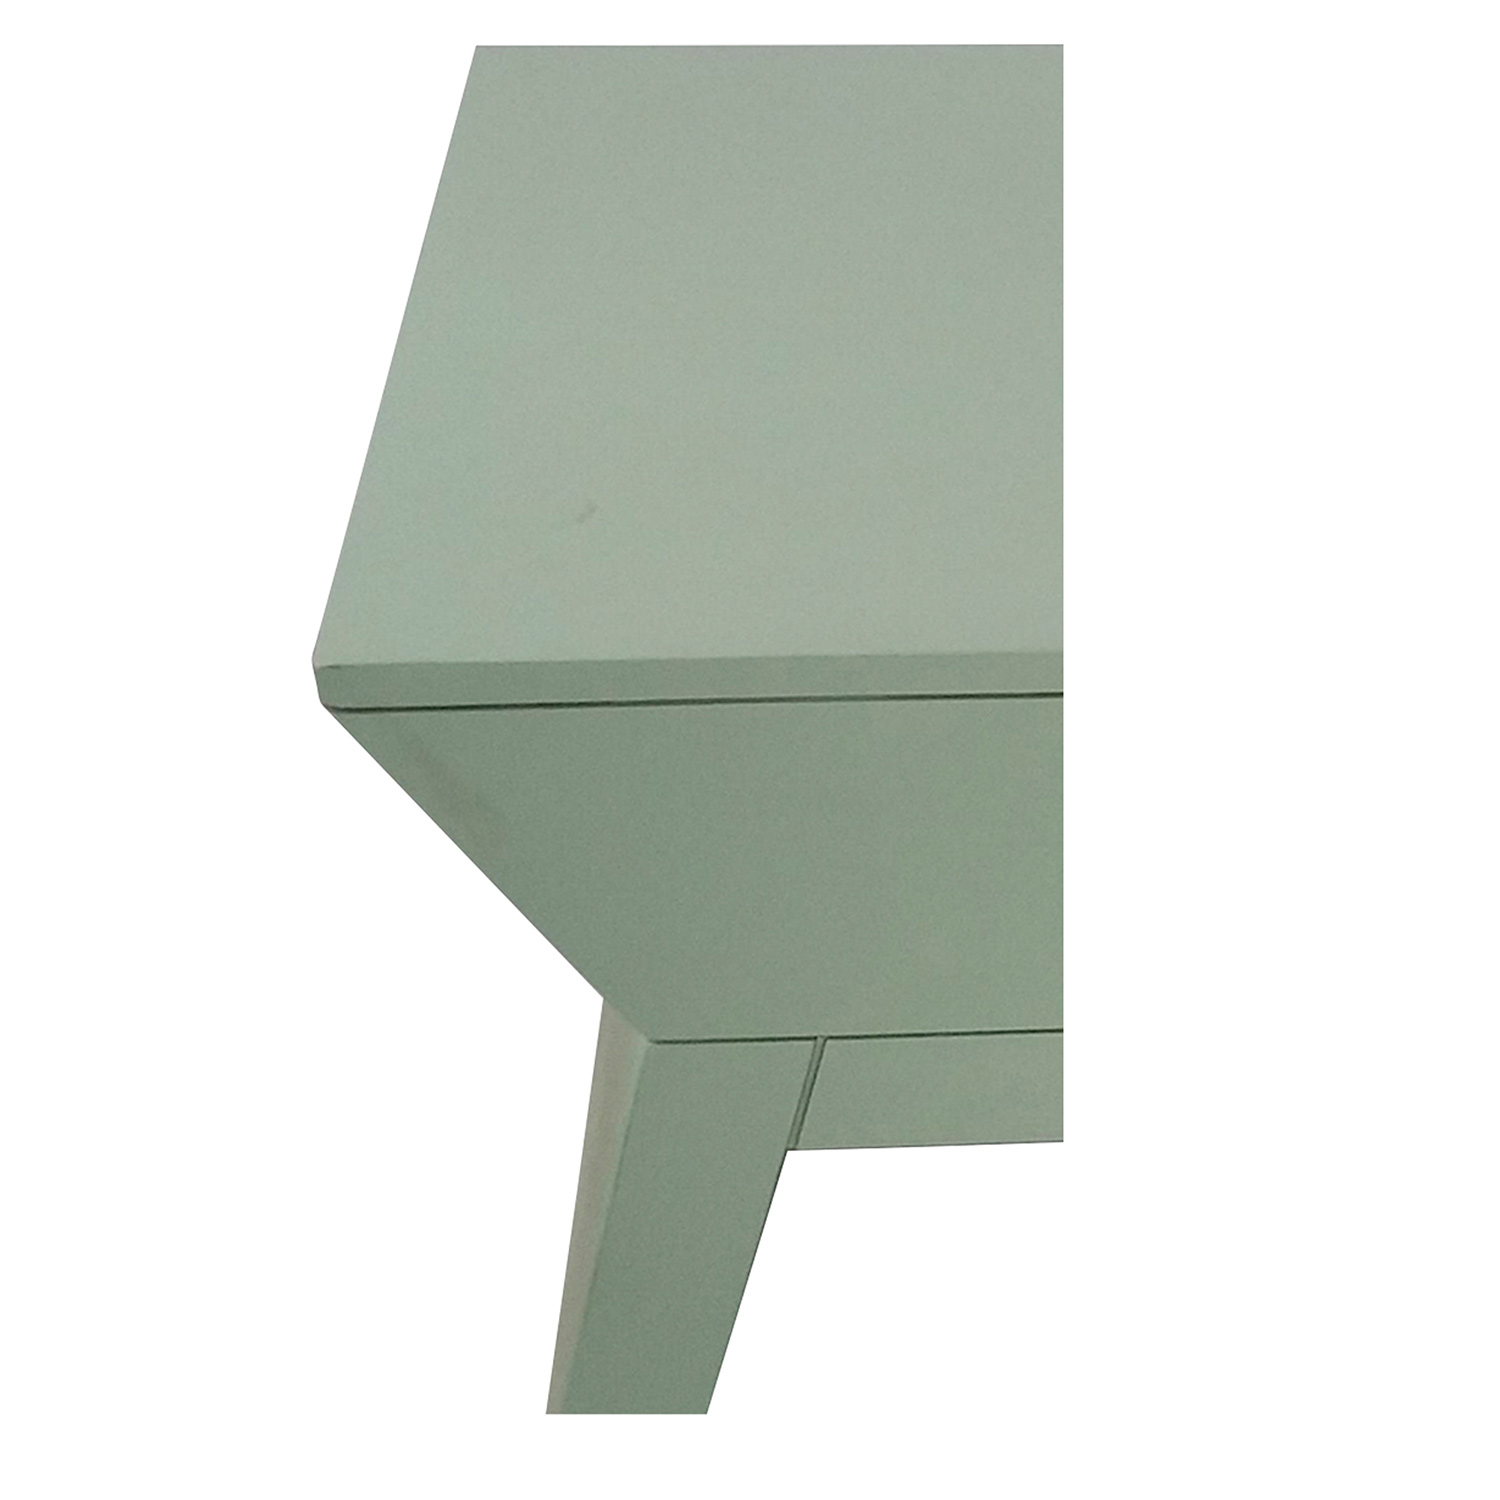 Ren-Wil PistachioHickory Stool - Mint